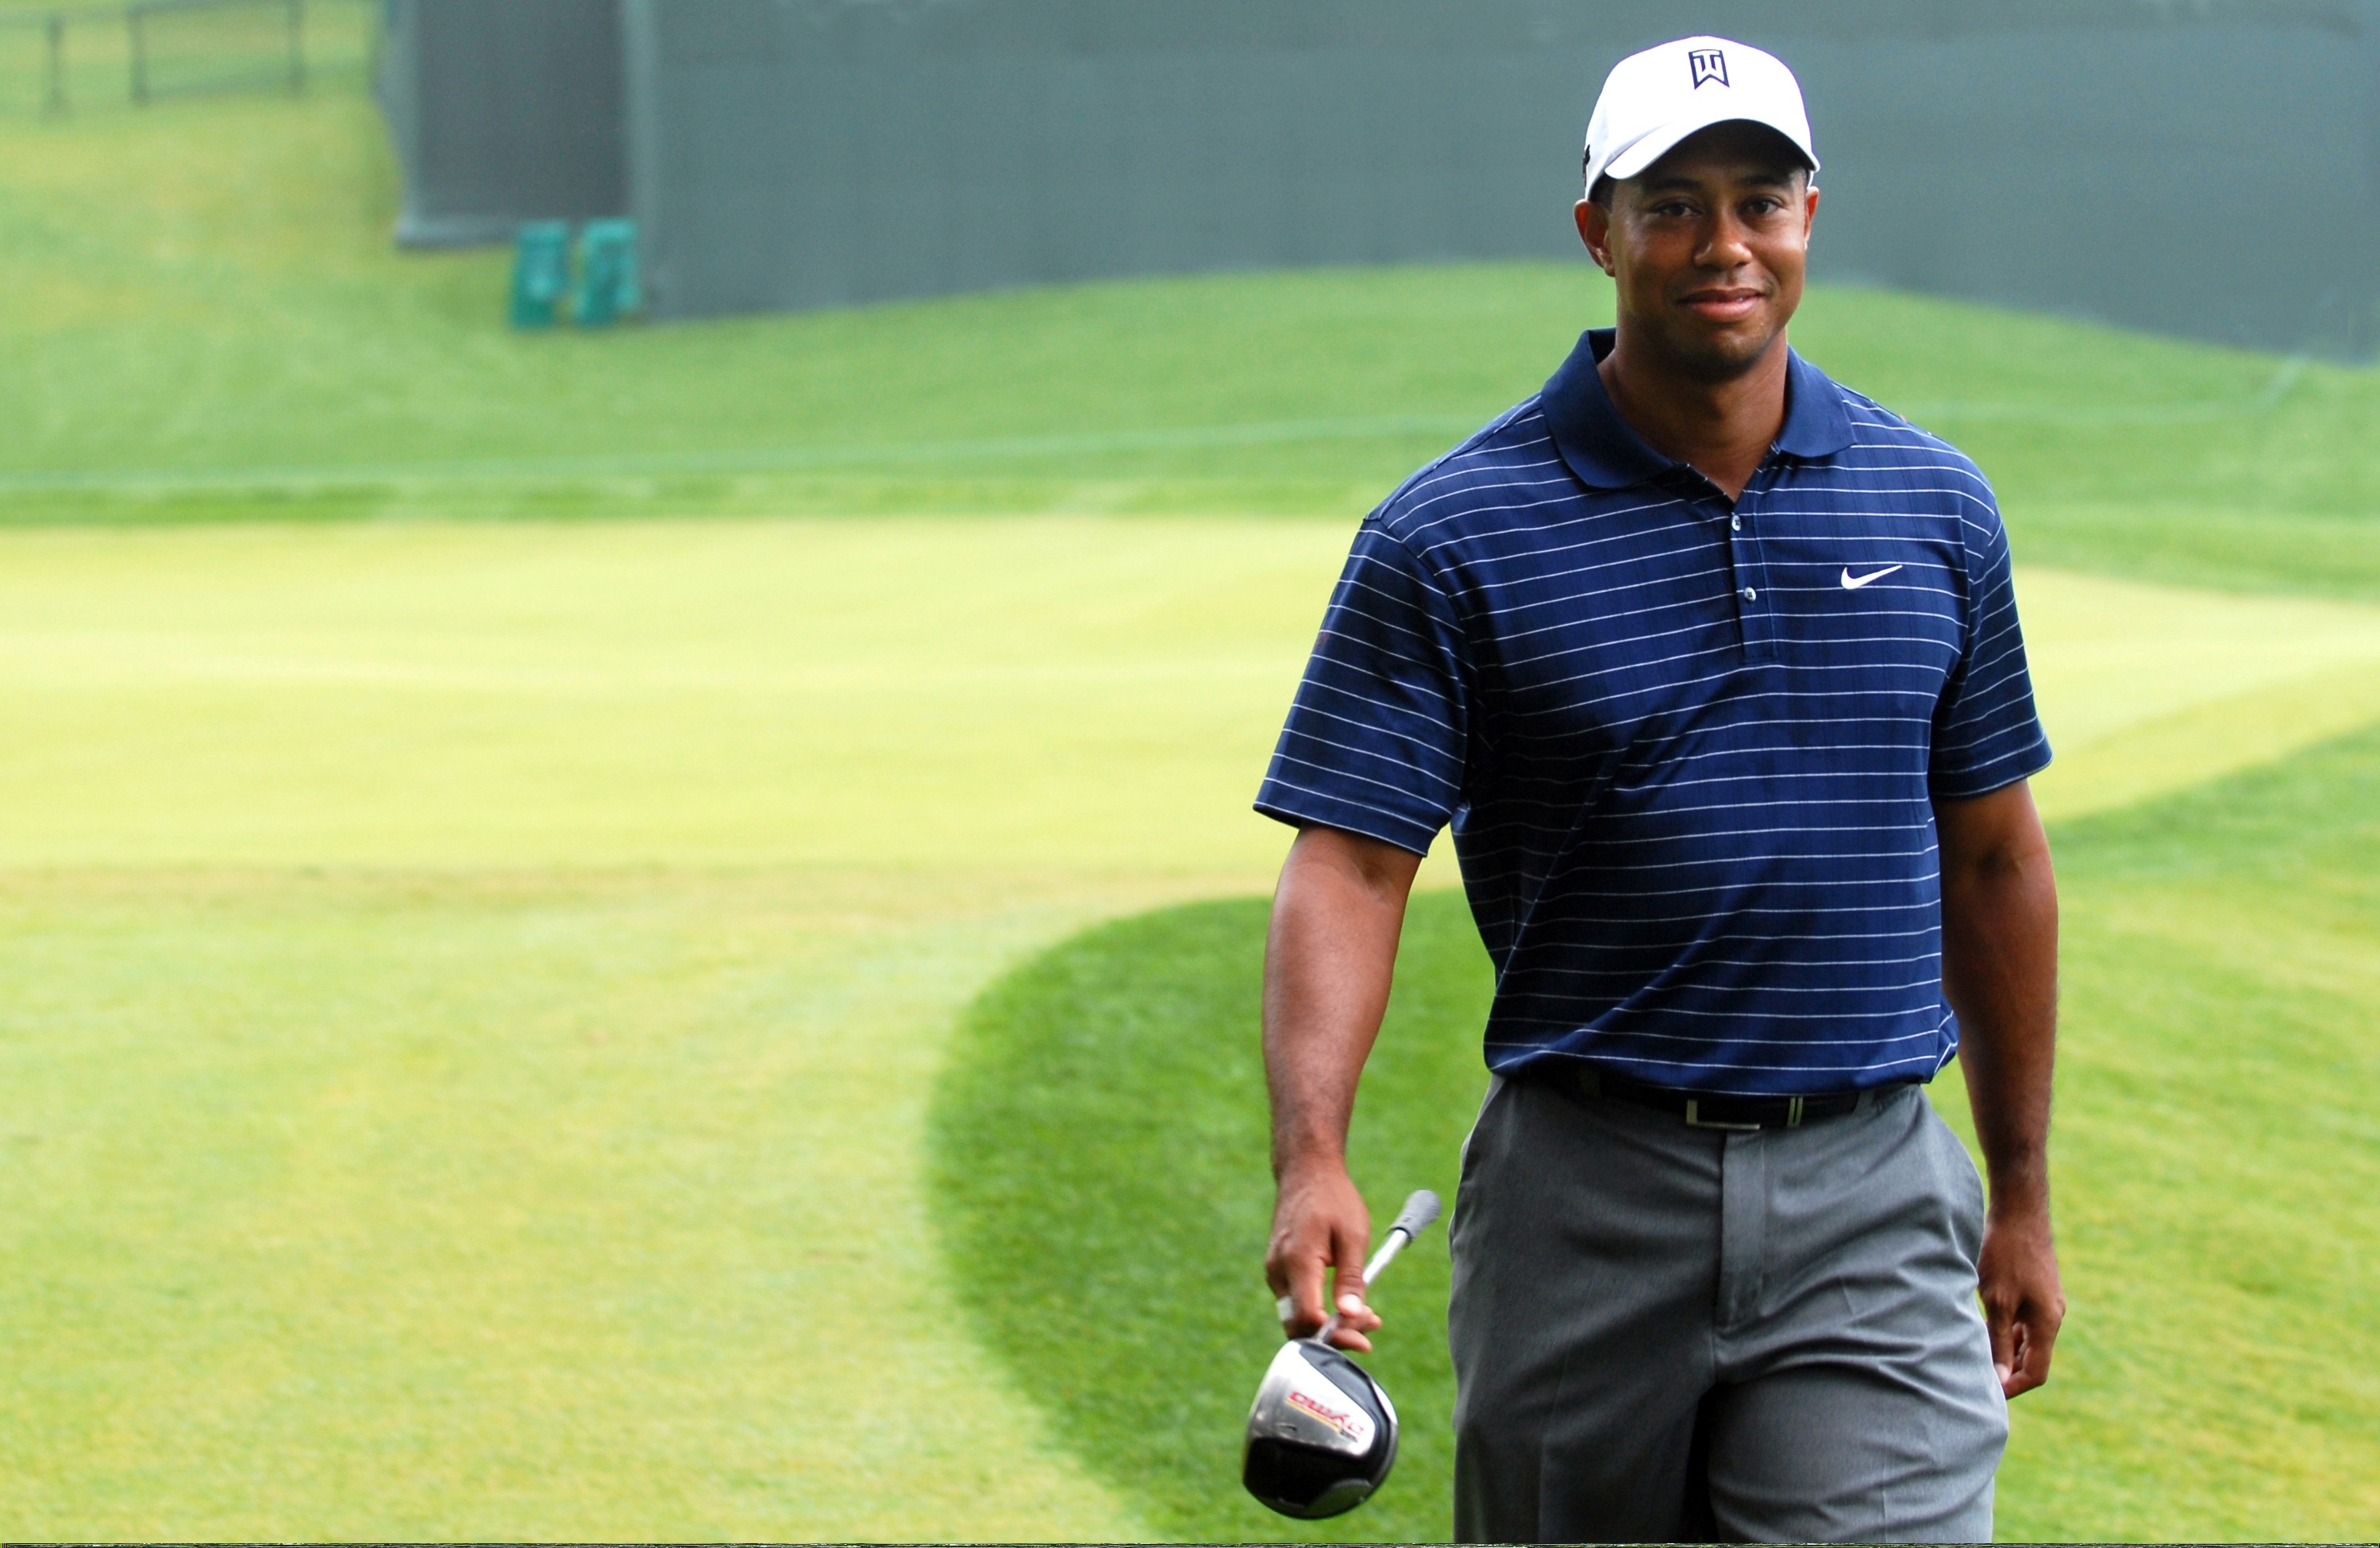 Tiger Woods feeling no pain, wants to compete again – in time